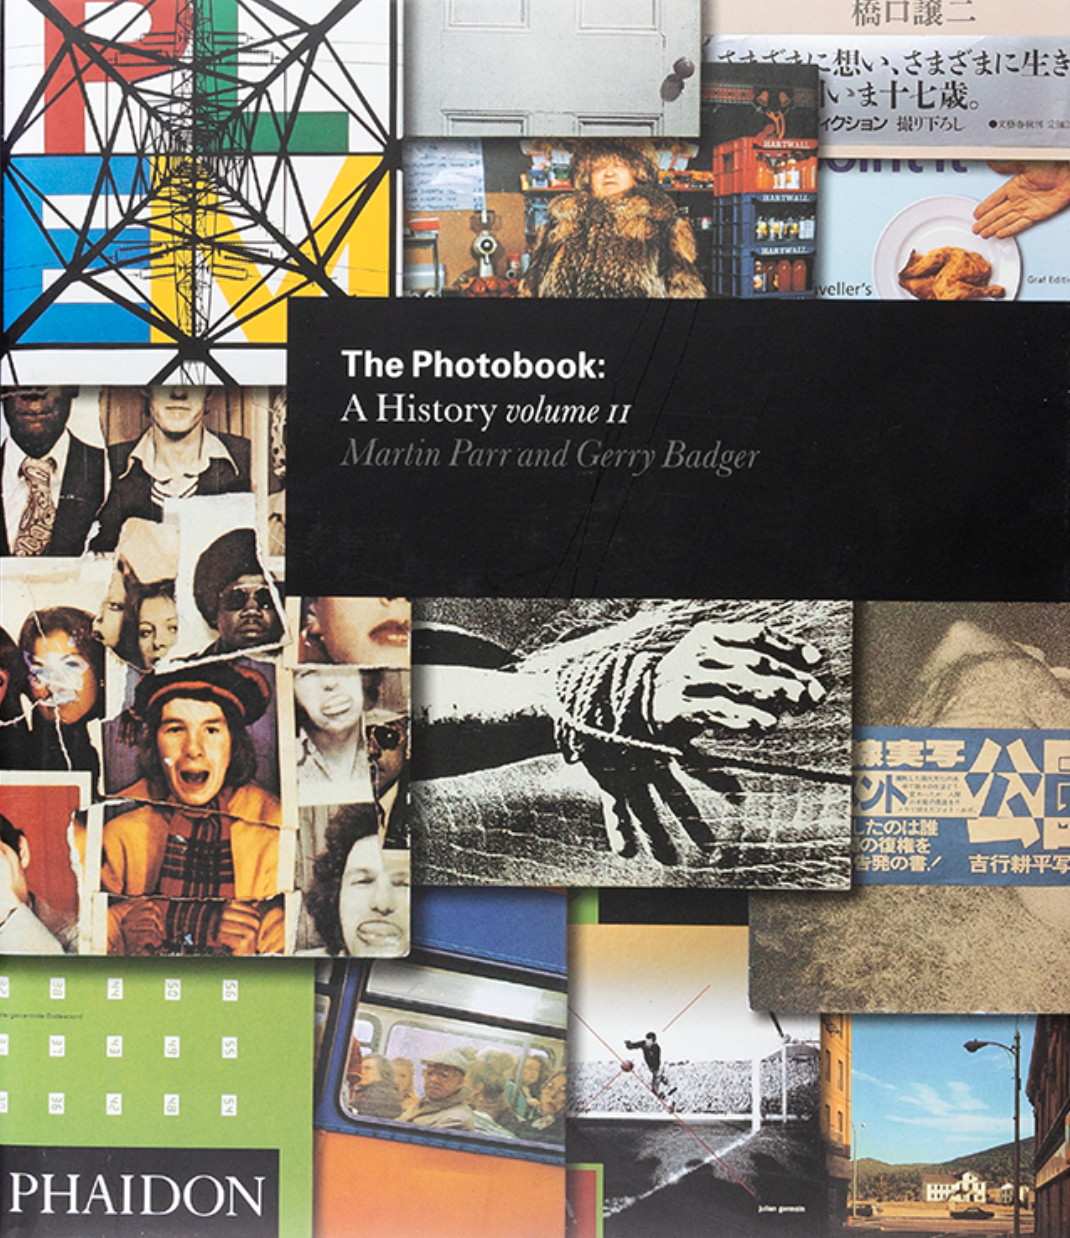 The Photobook: A History Volume II, Martin Parr and Gerry Badger